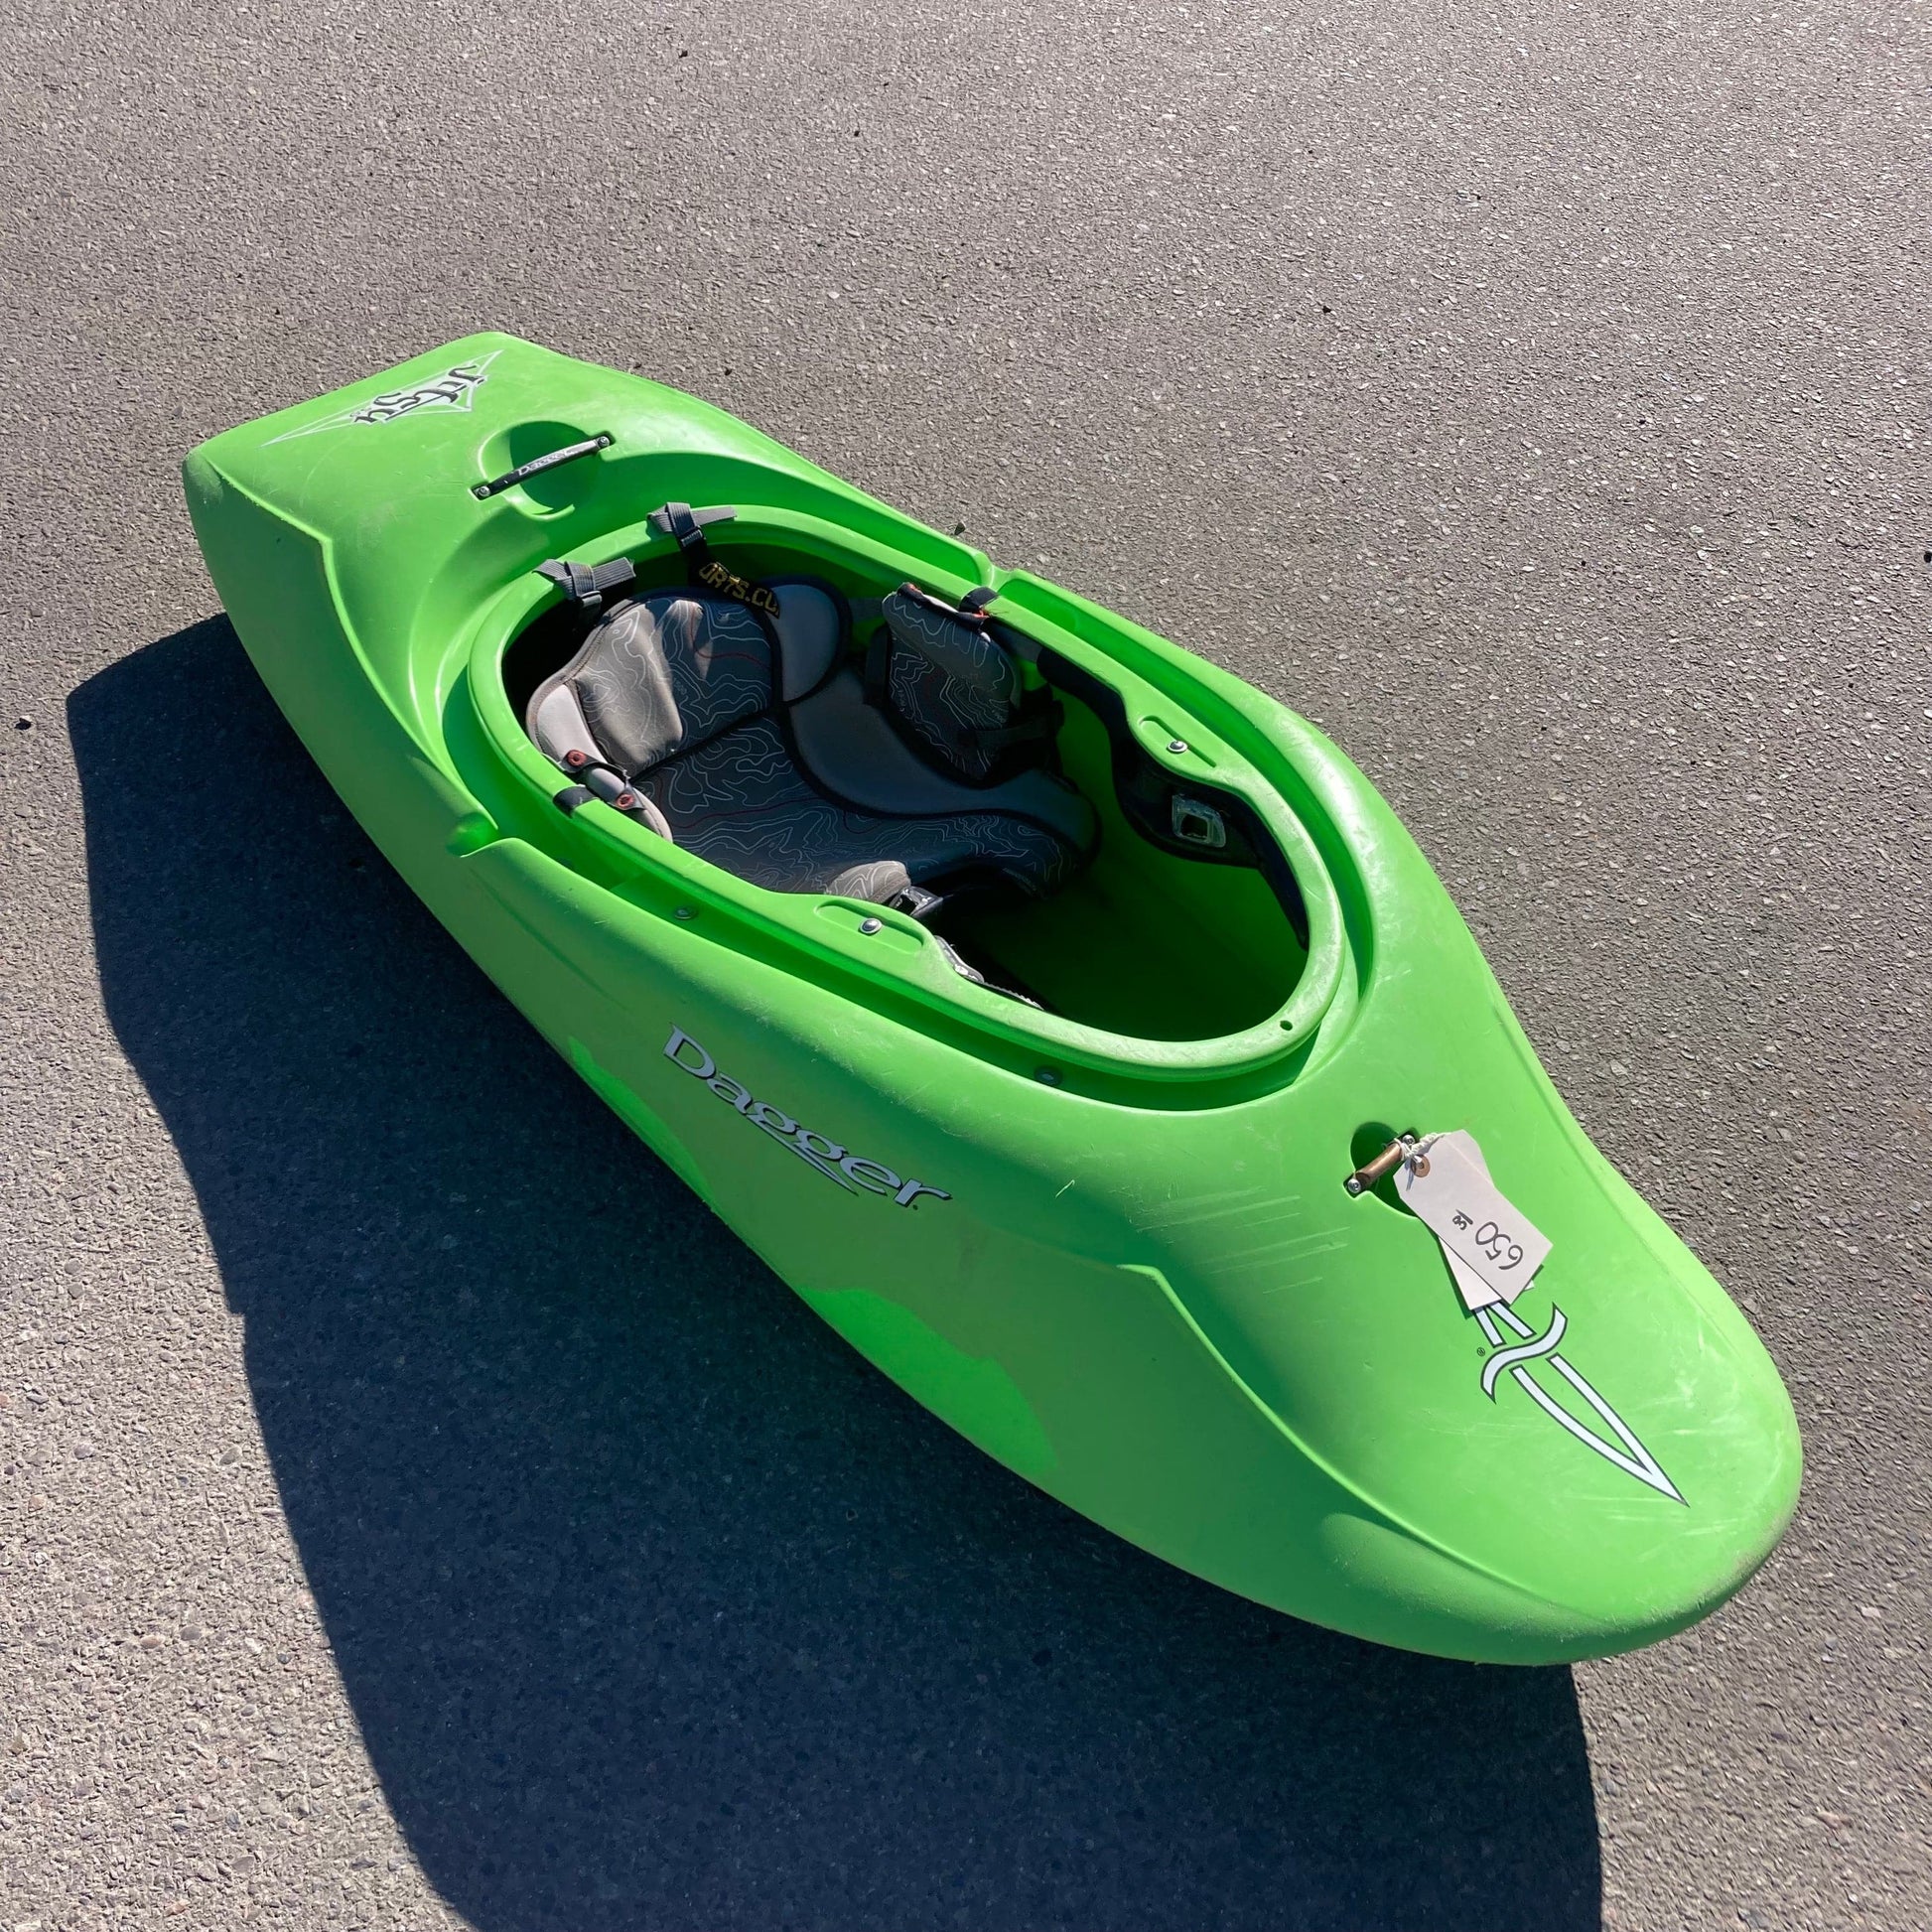 A 4CRS Consignment Jitsu 5.9 kayak is parked on the side of the road.